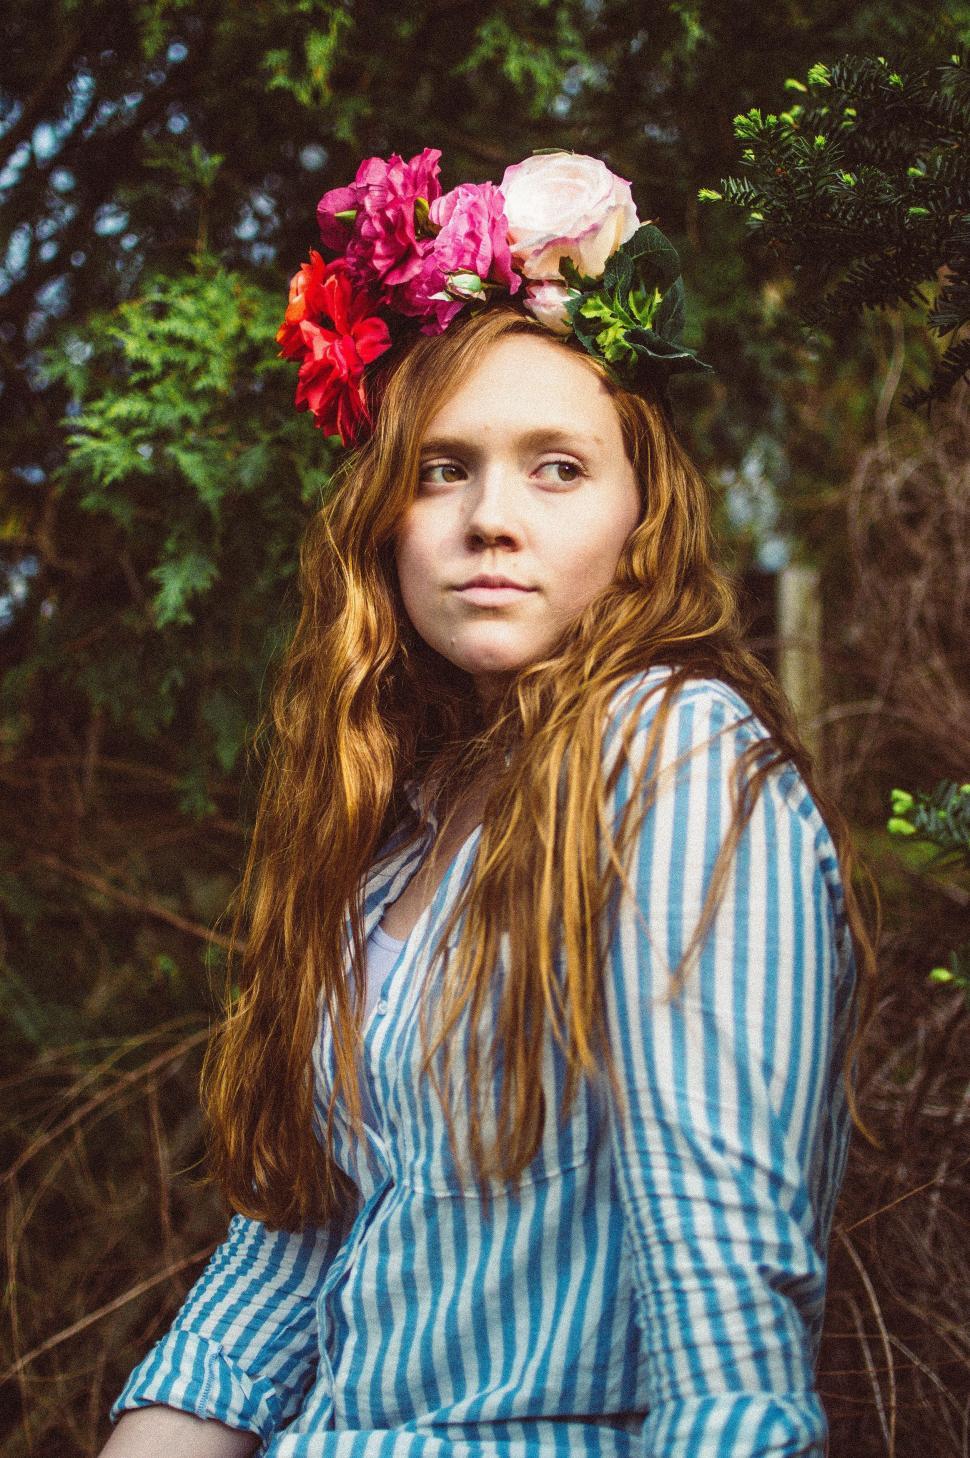 Free Image of Woman With Long Red Hair Wearing Flower Crown 